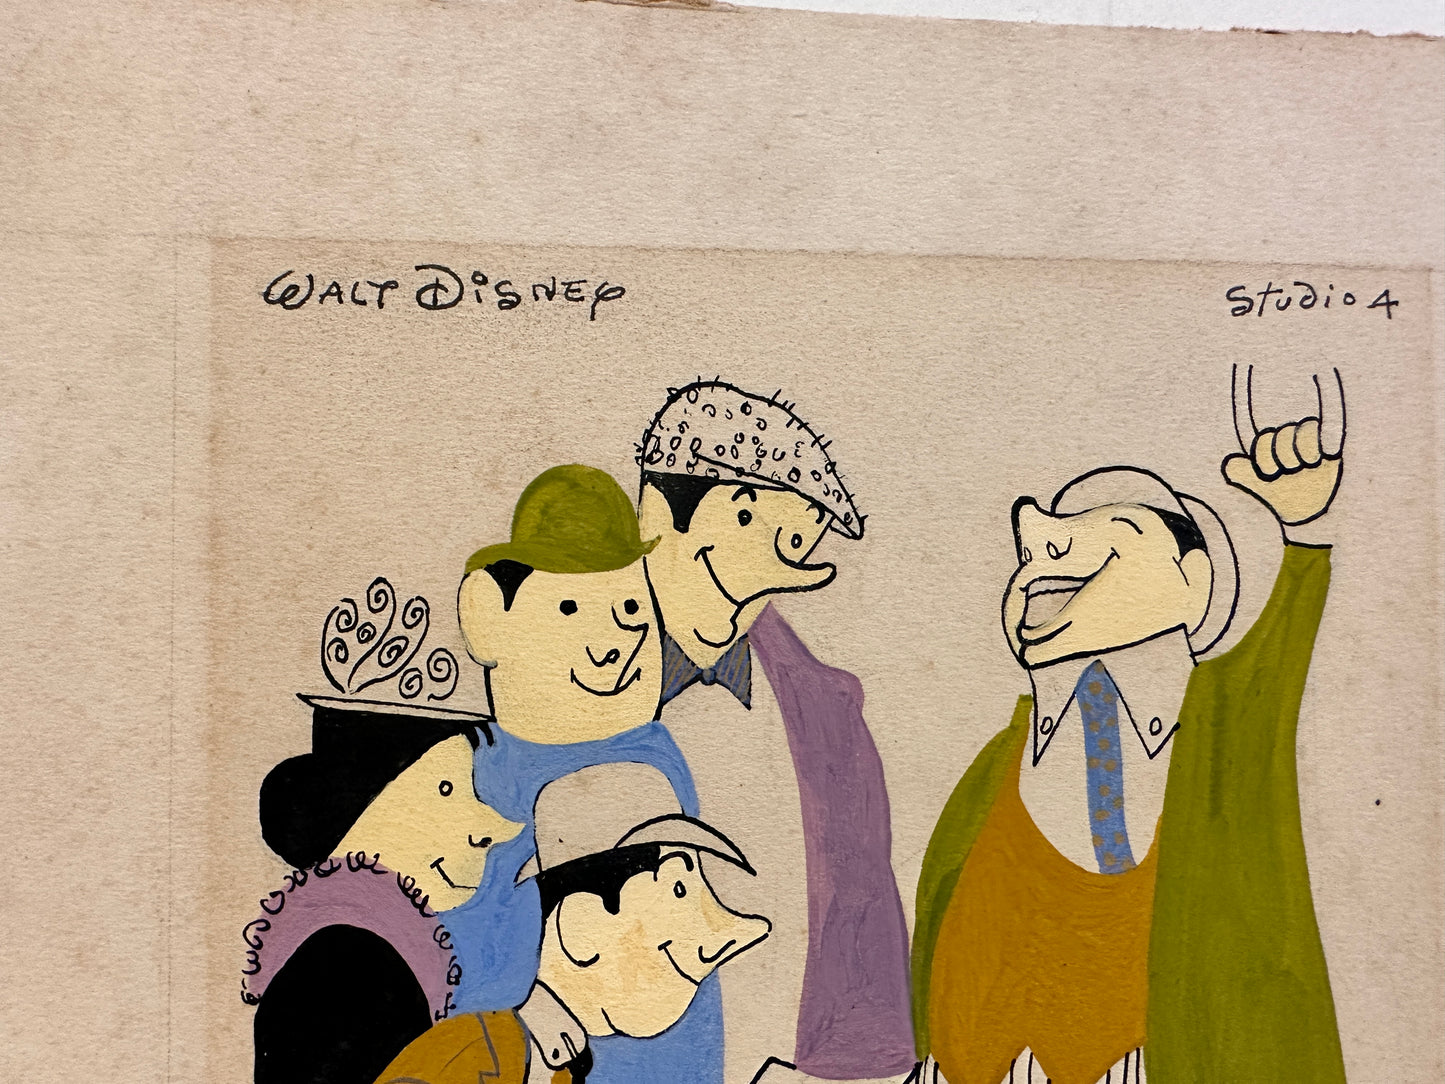 Walt Disney Signed Drawing: Five People and a Purple Poodle